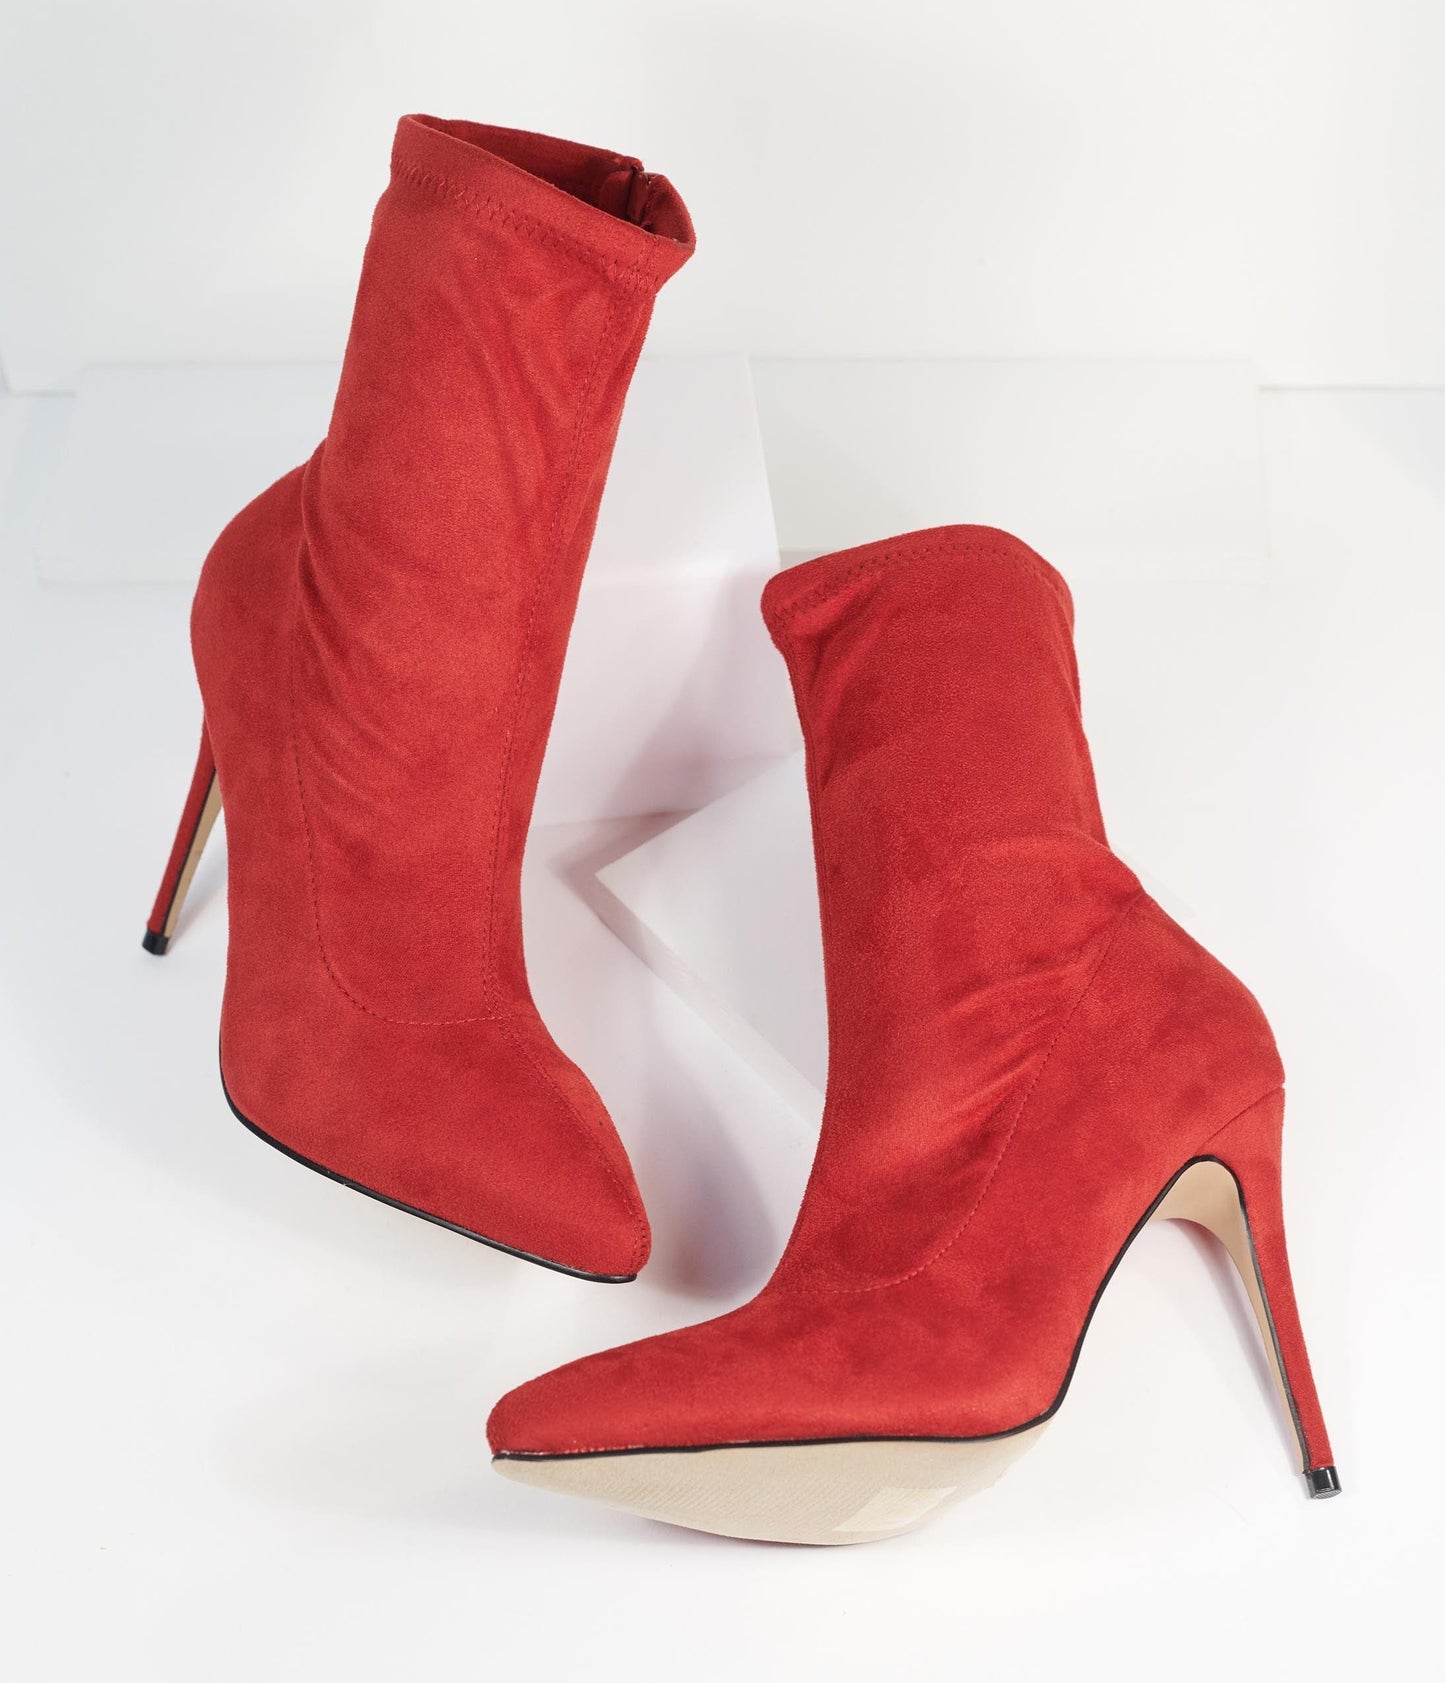 1990s Red Suede High Stiletto Ankle Boots